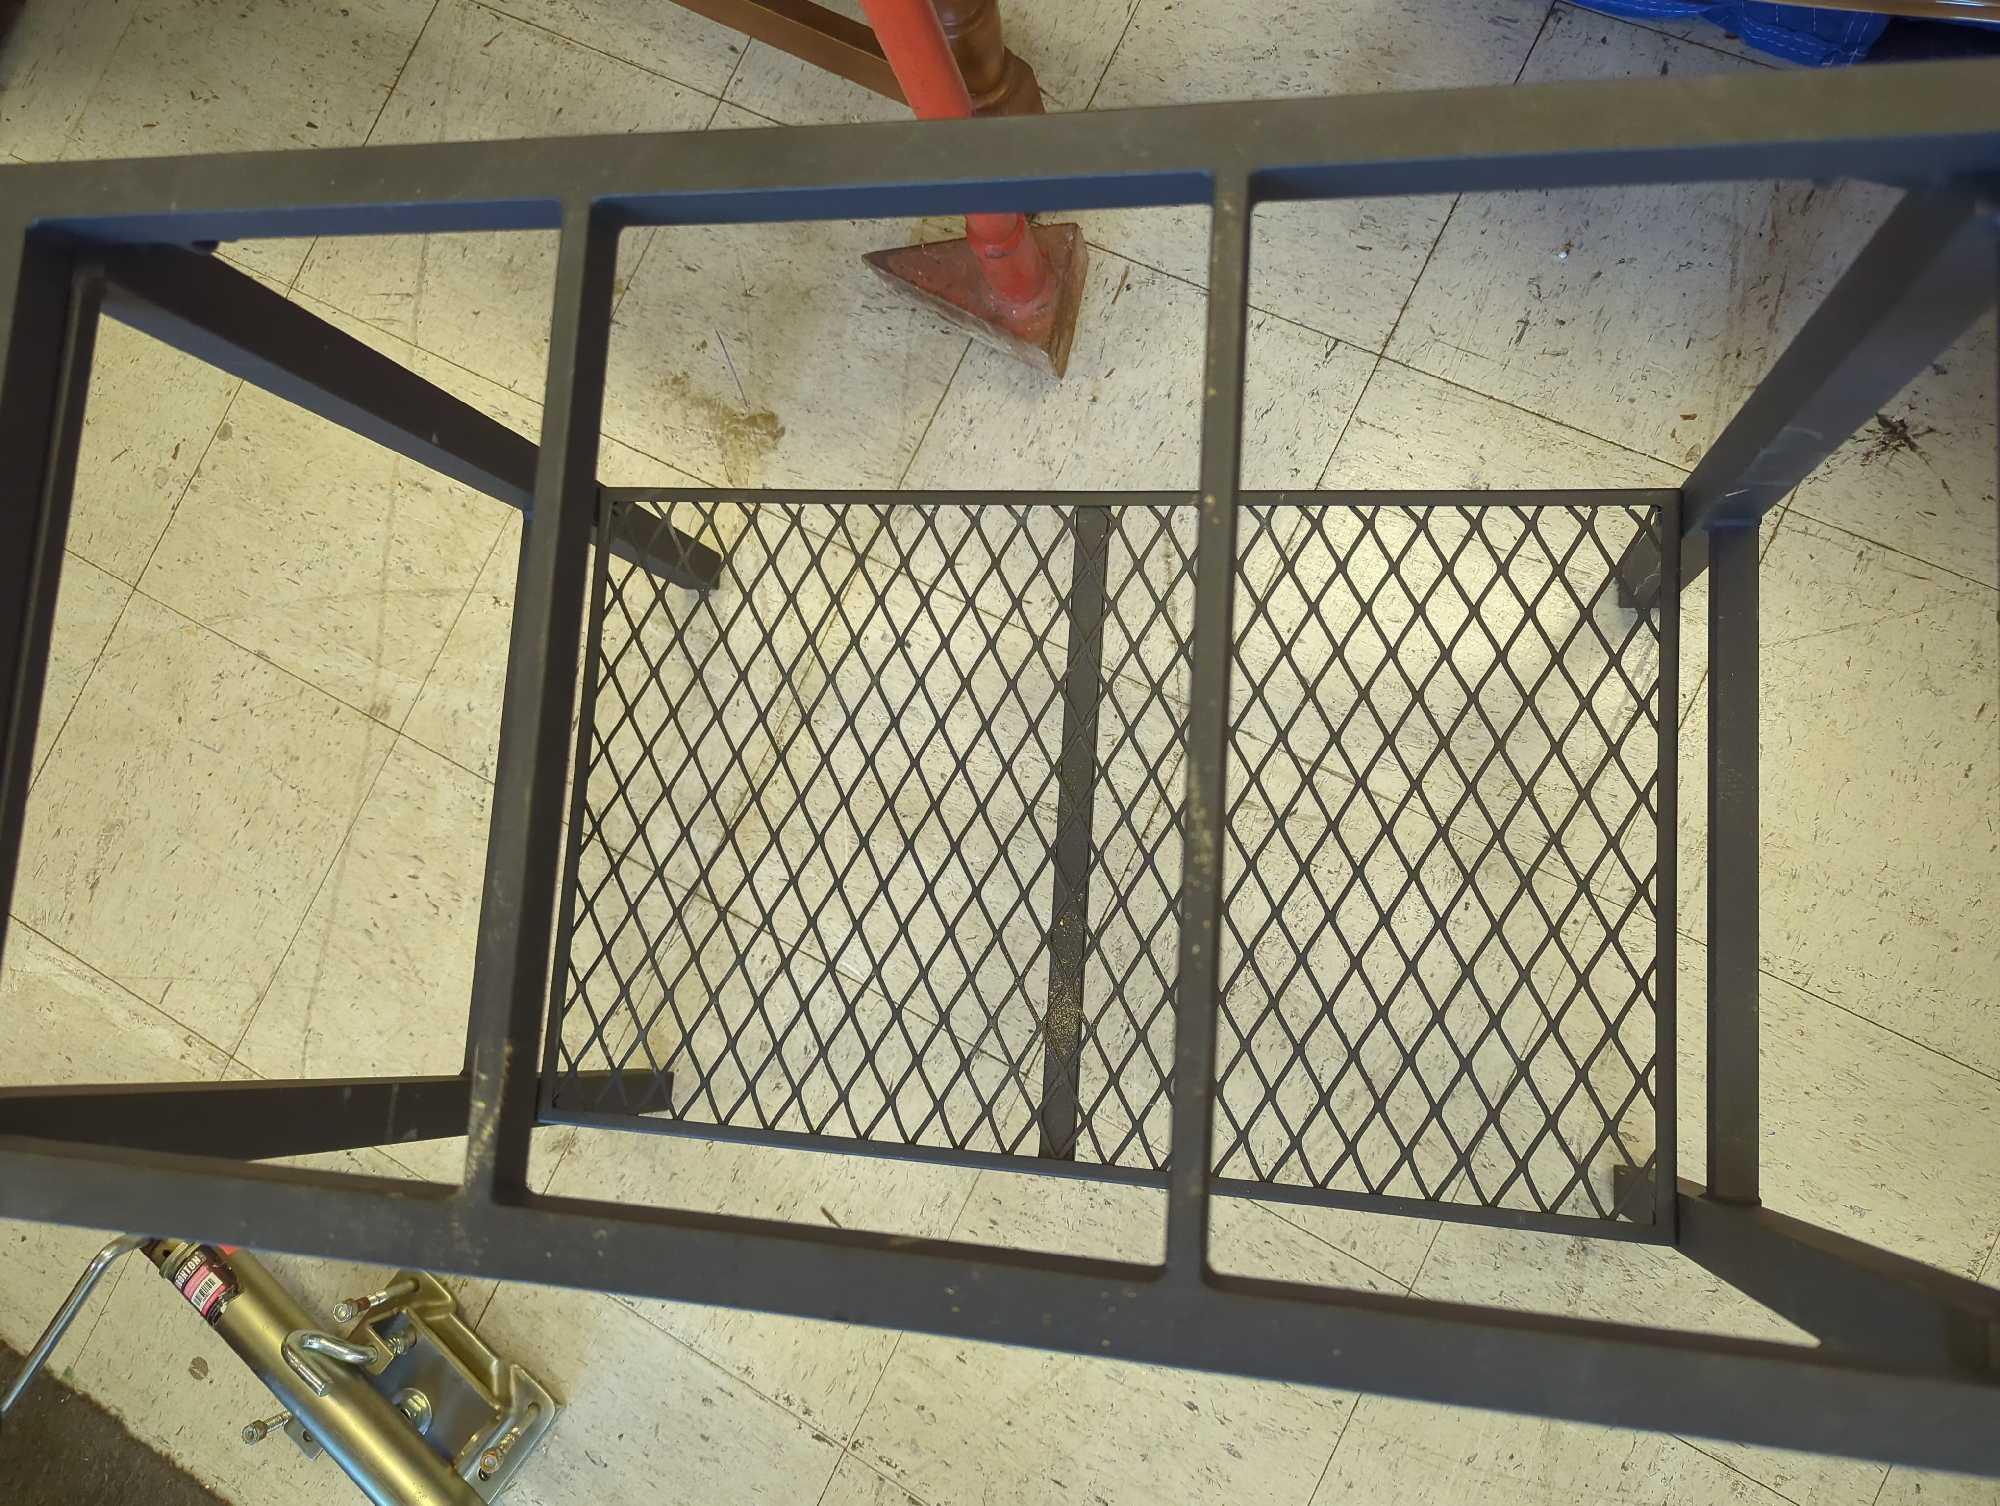 Black Metal Aquarium Stand With Bottom Shelf, 25 in x 17.5 in x 27.5 in, What you see in photos is